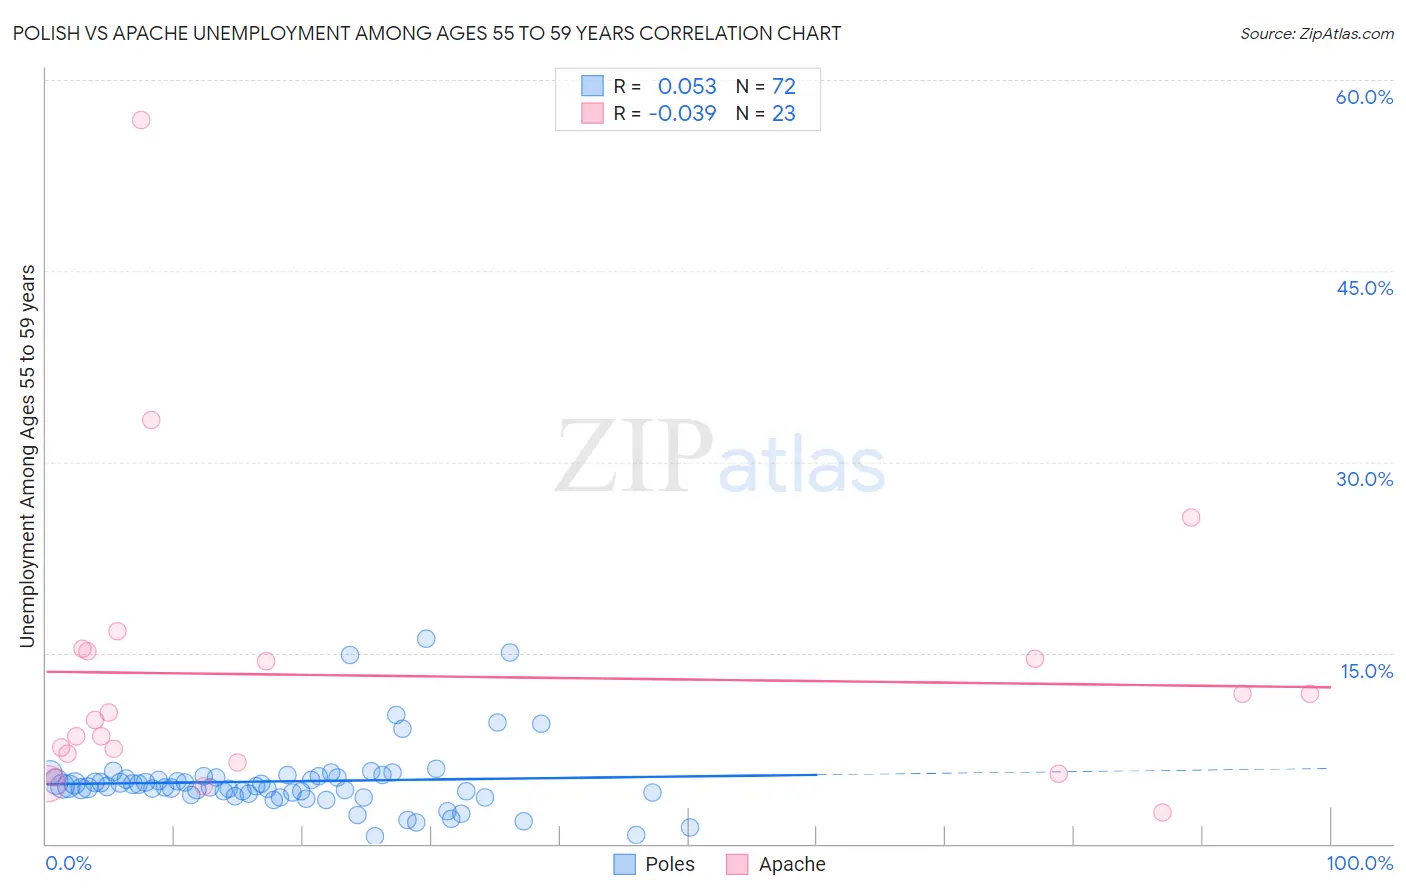 Polish vs Apache Unemployment Among Ages 55 to 59 years